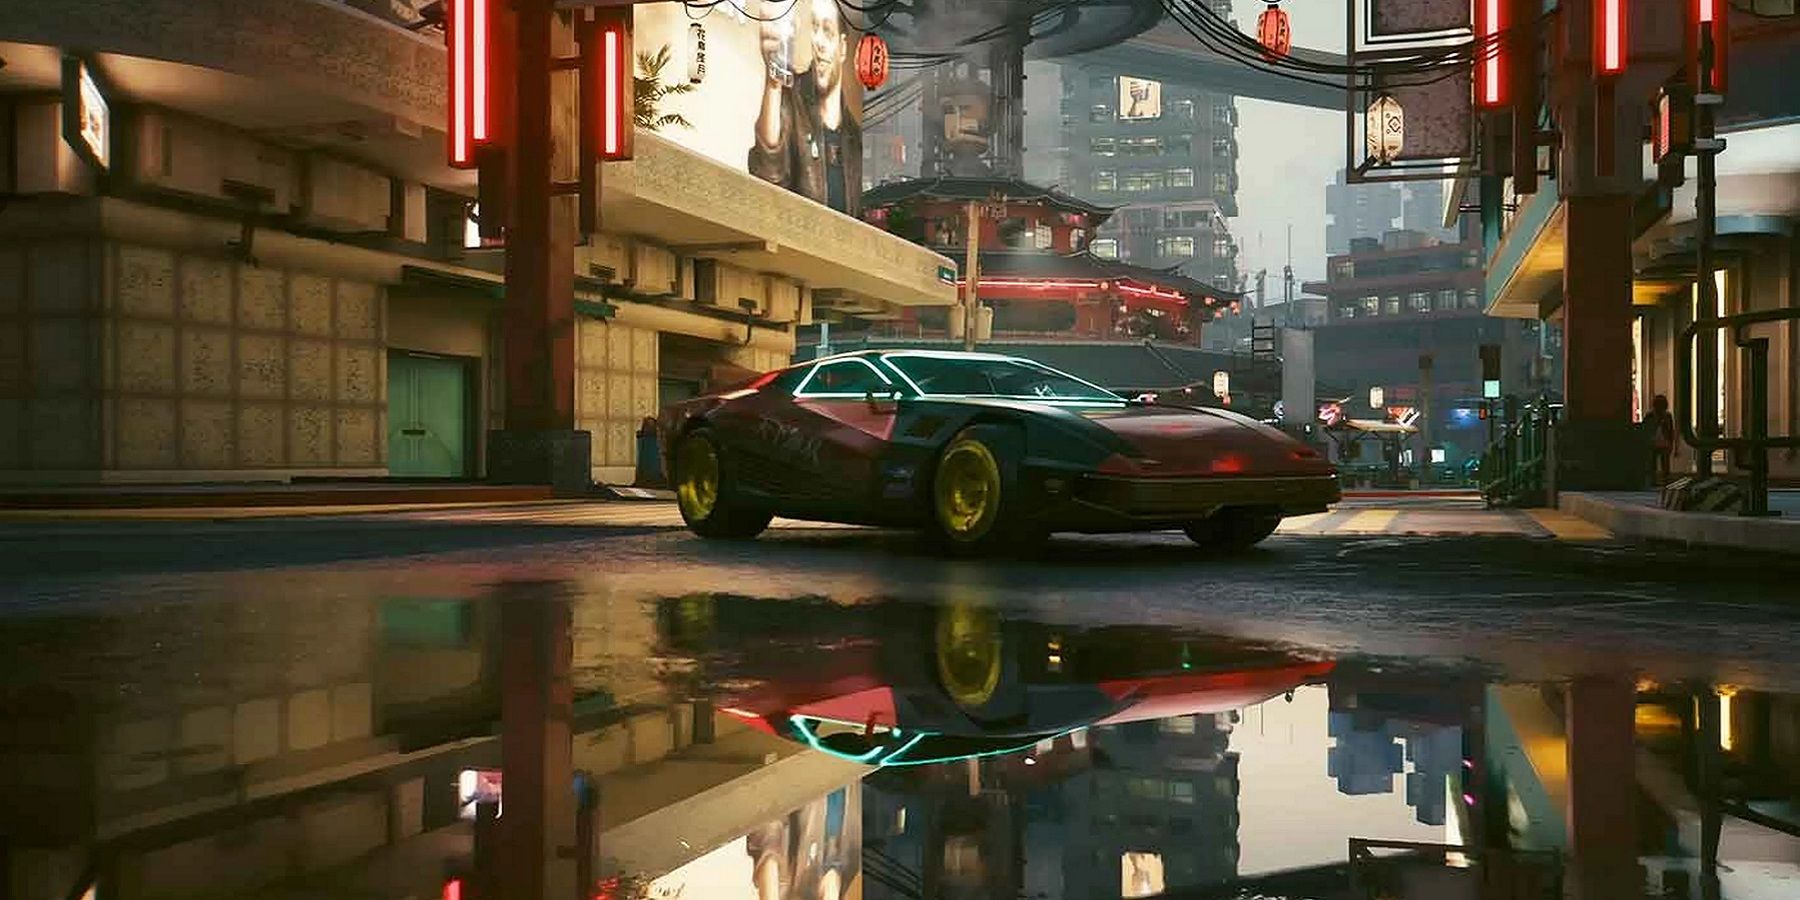 Detailed image from Cyberpunk 2077 showing a car in front of a reflective puddle.